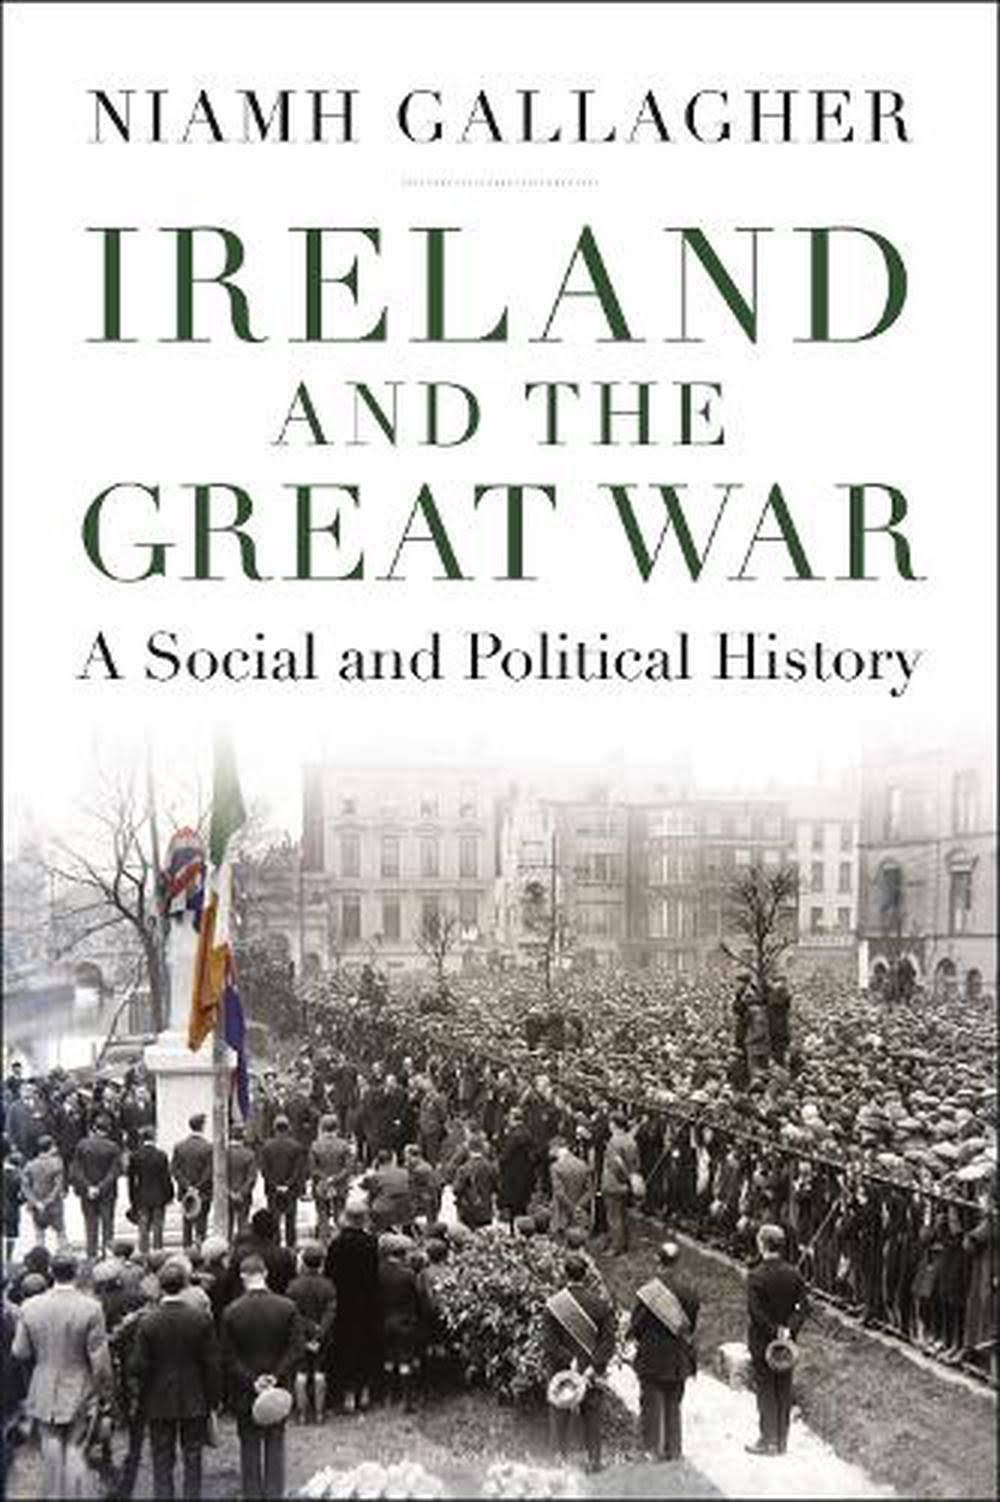 Ireland and The Great War by Niamh Gallagher